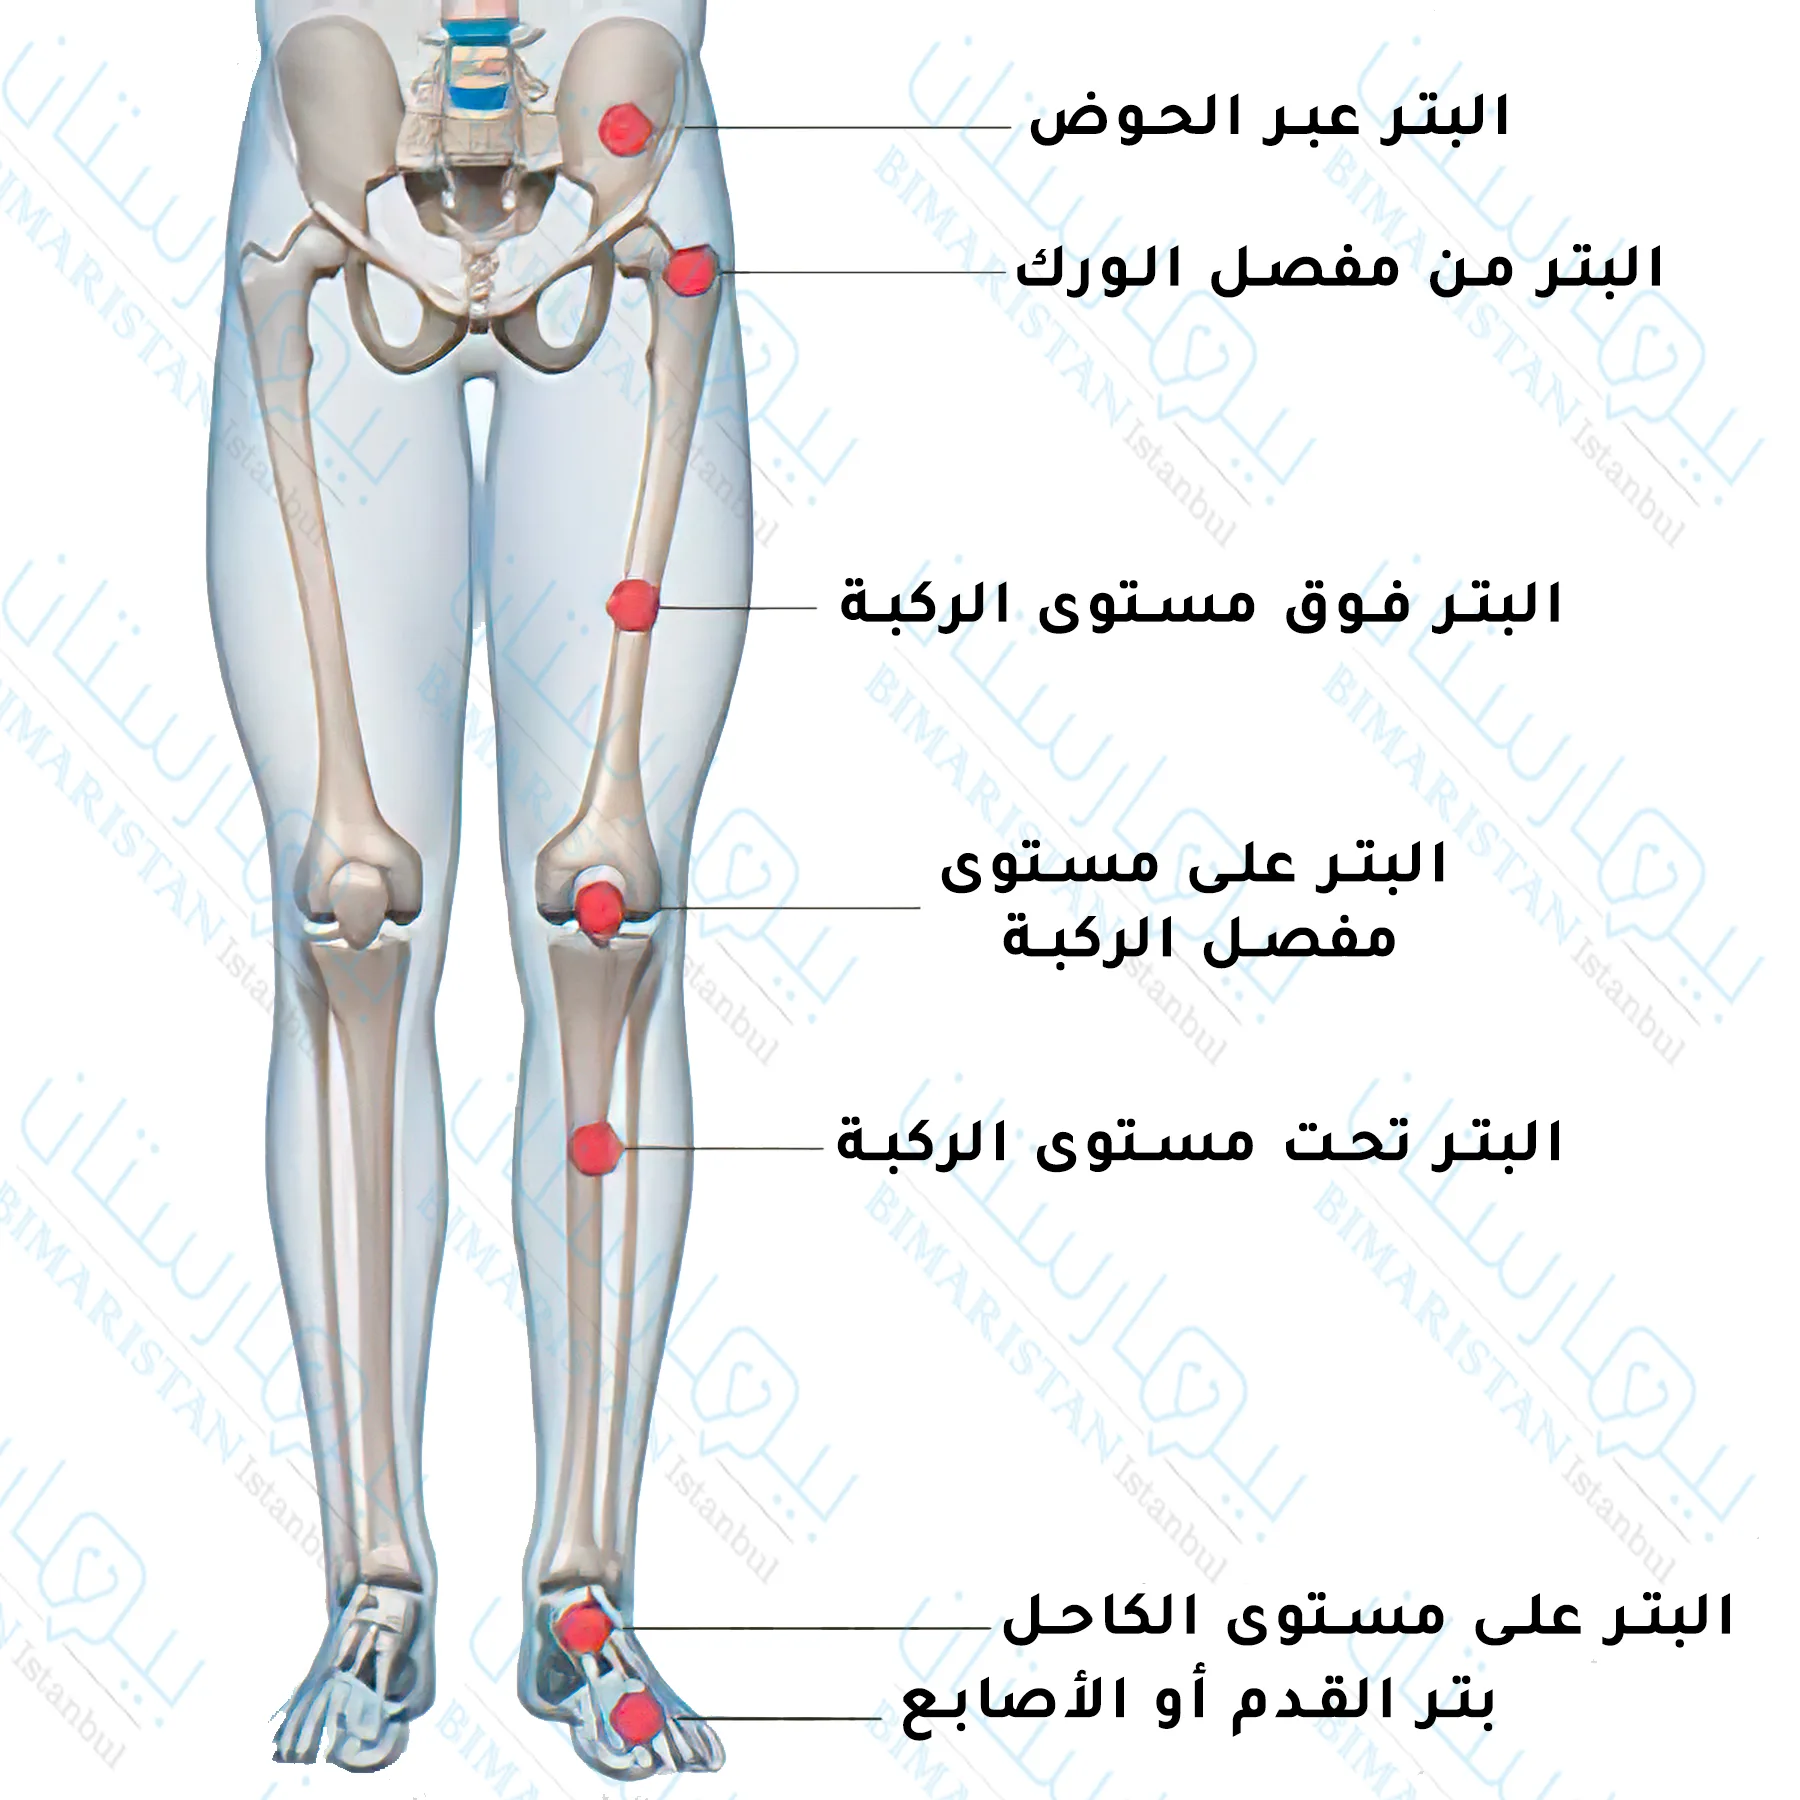 A picture of the lower limbs in humans showing the levels of the amputation process